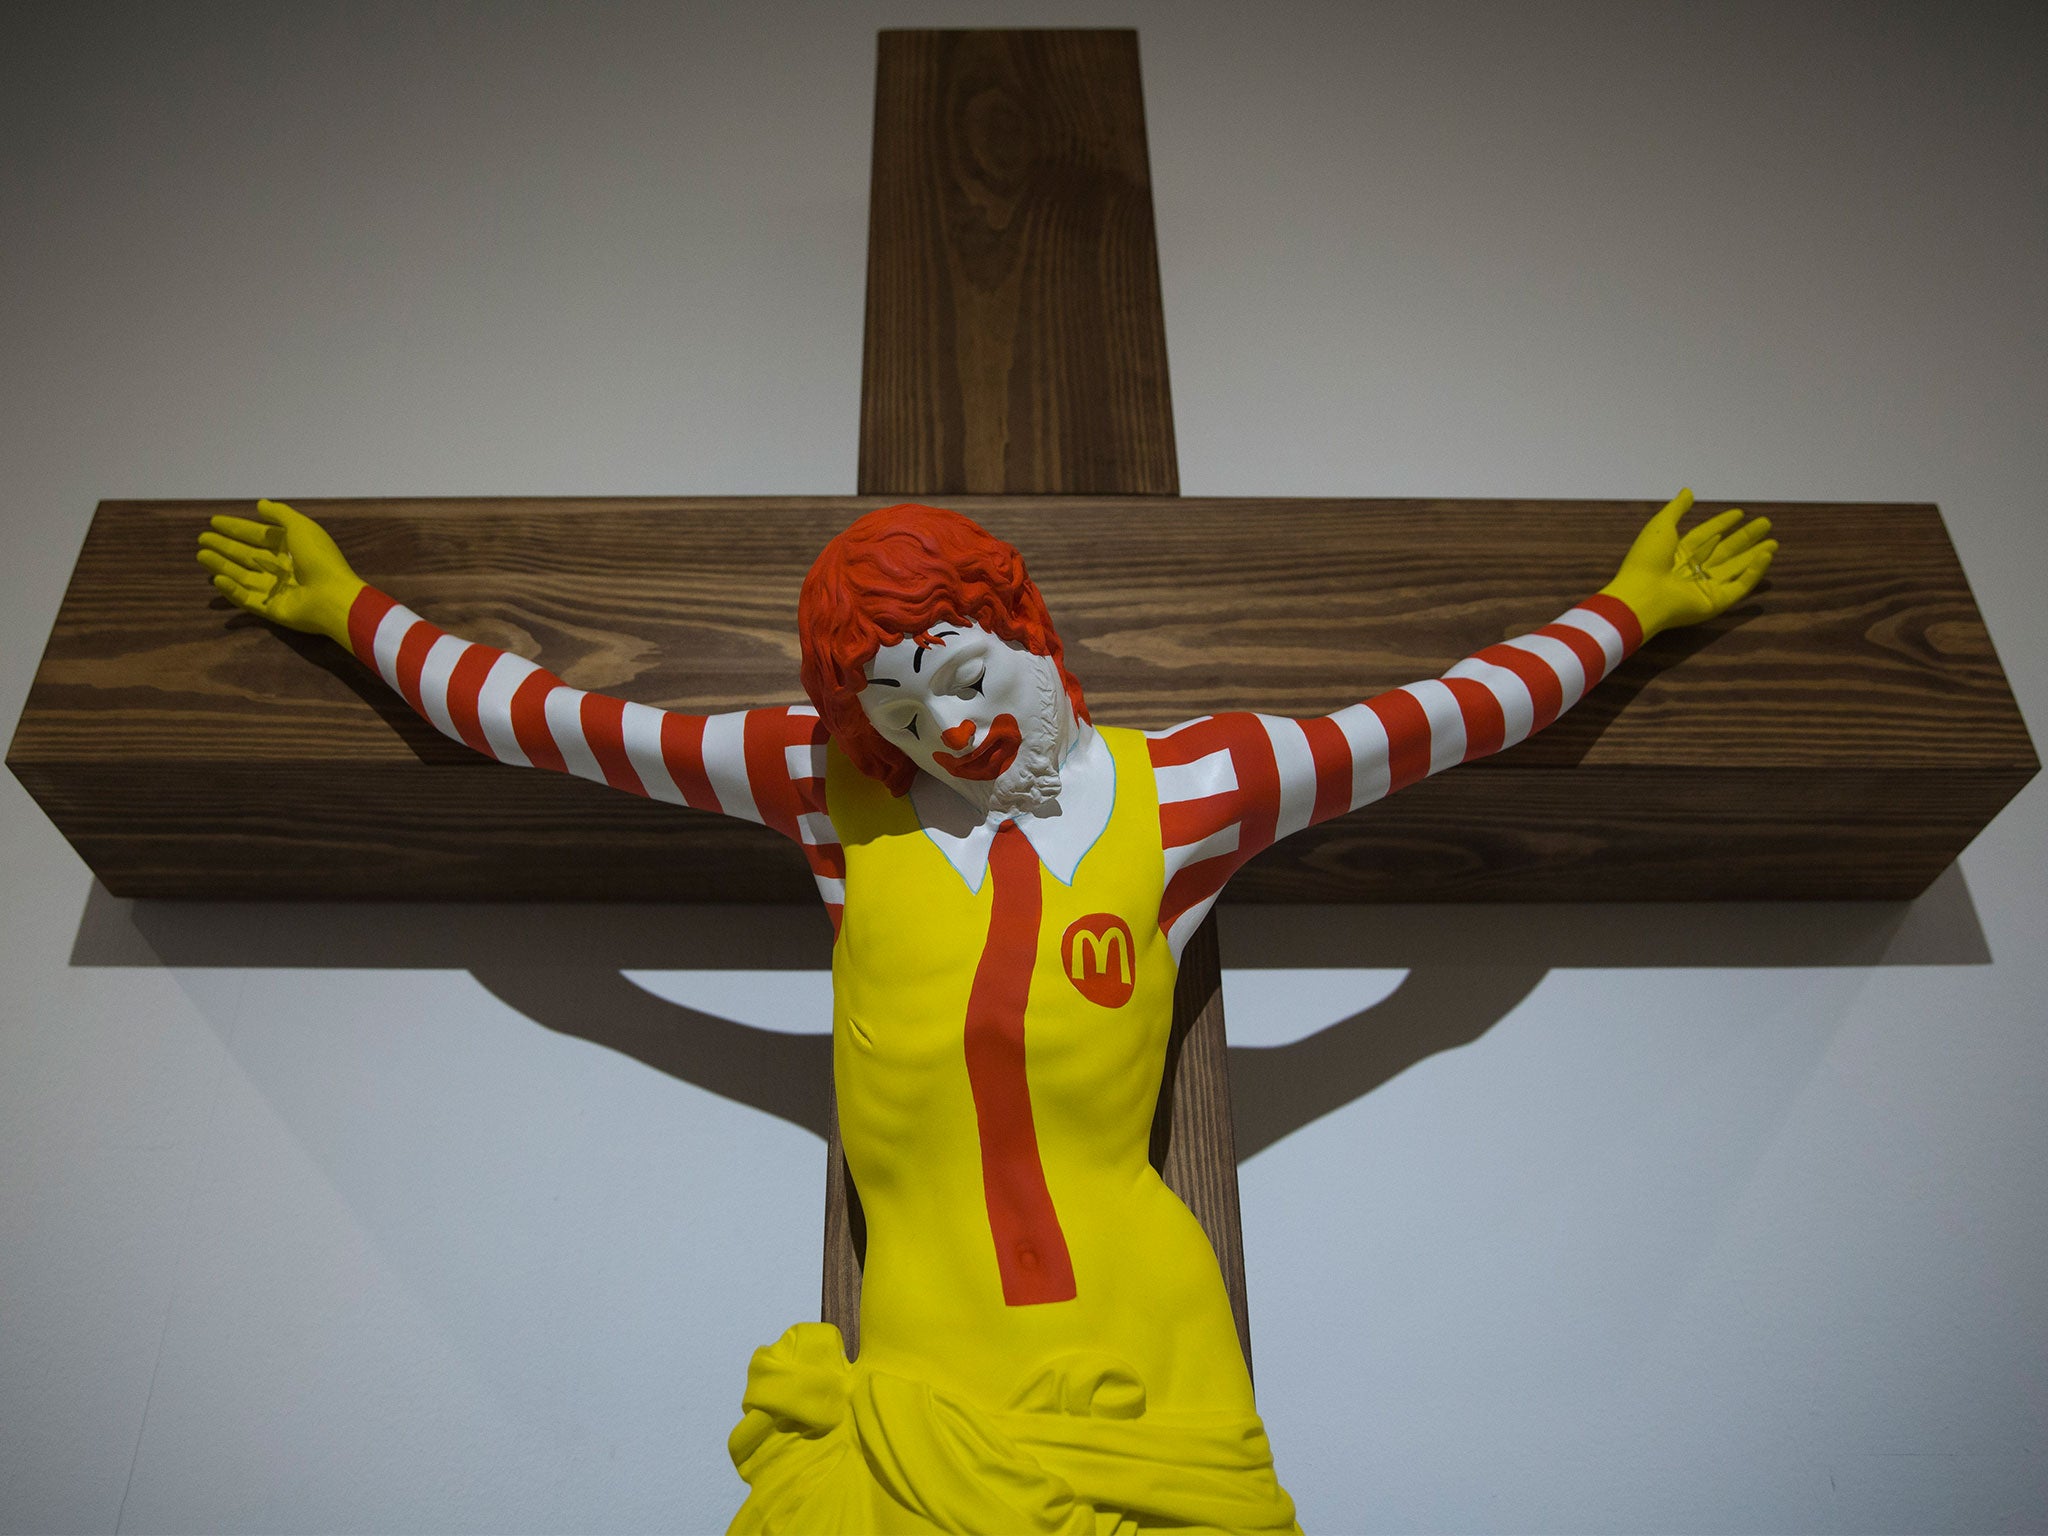 McJesus, by Finish artist Jani Leinonen, features a depiction of fast food mascot Ronald McDonald on a crucifix